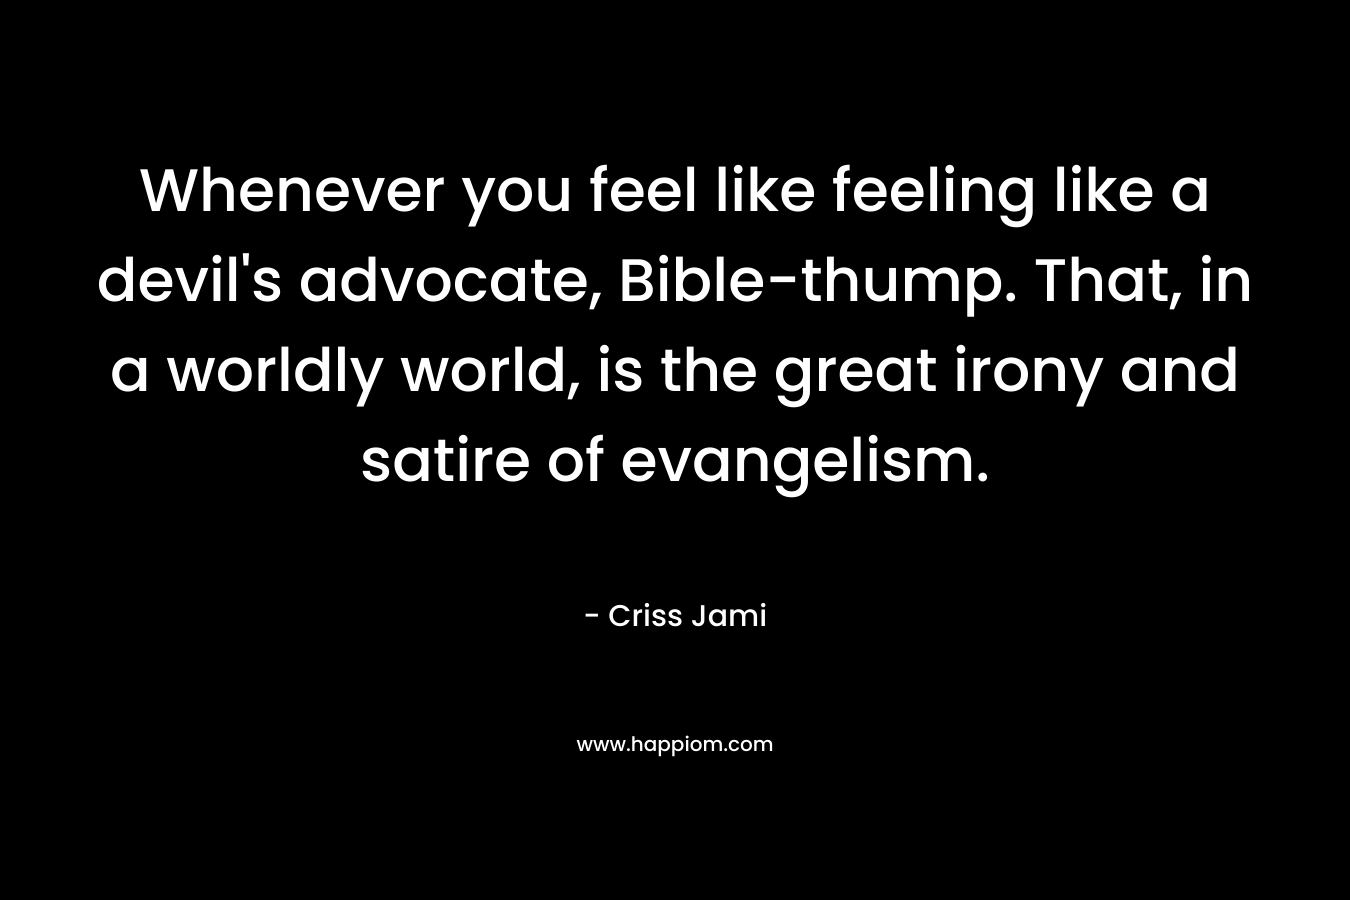 Whenever you feel like feeling like a devil's advocate, Bible-thump. That, in a worldly world, is the great irony and satire of evangelism.